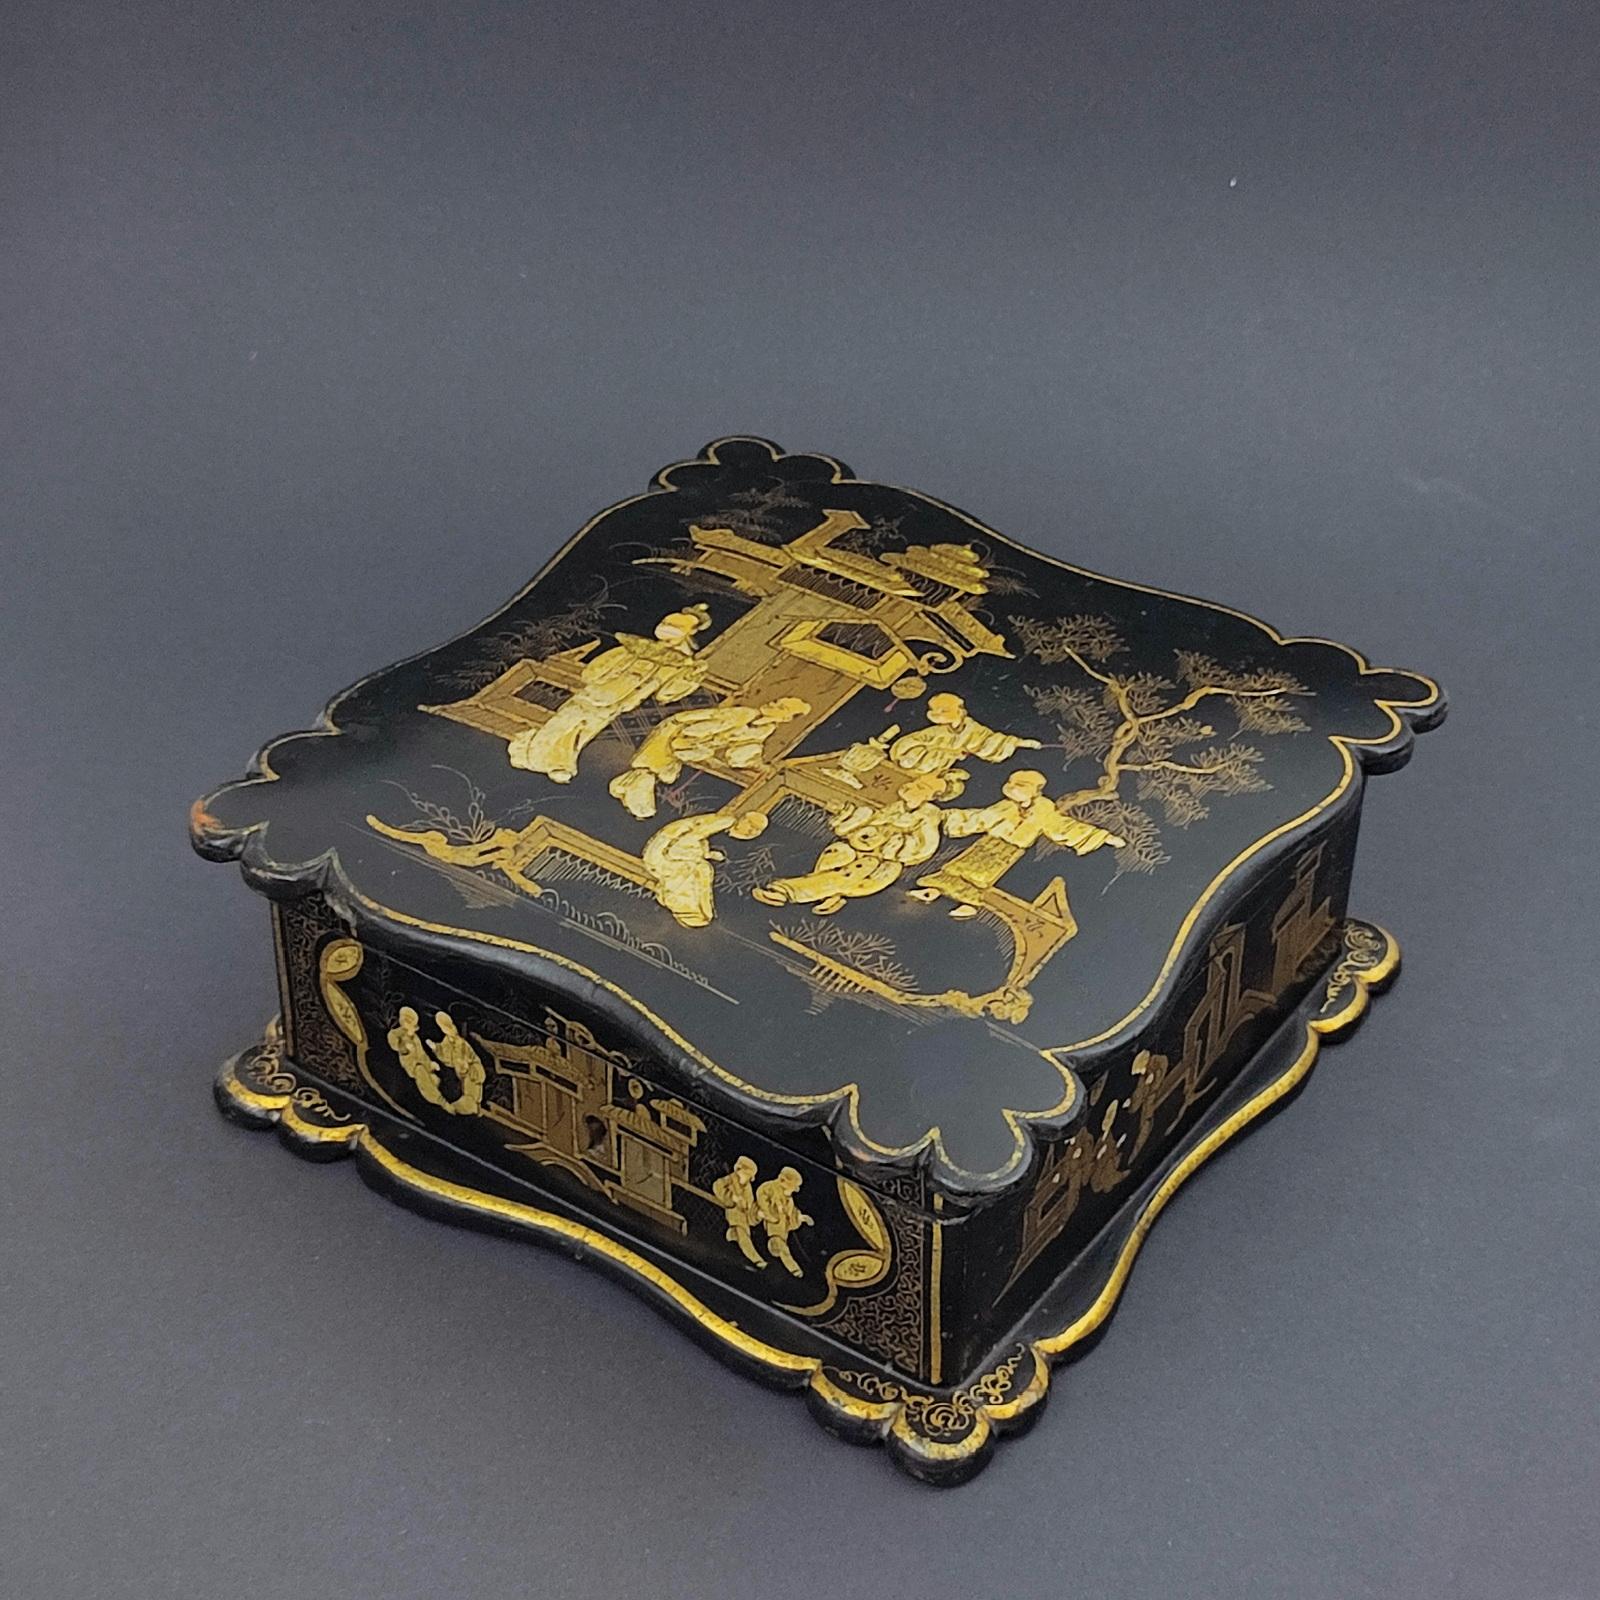 French Napoleon III Jewelry Box in Black Lacquer with Asian Decor, 19th Century.
A square jewelry box with ribbed edges, decorated with gold courtiers in the palace, on a black lacquer background. Interior padded in pink silk.

Napoleon III